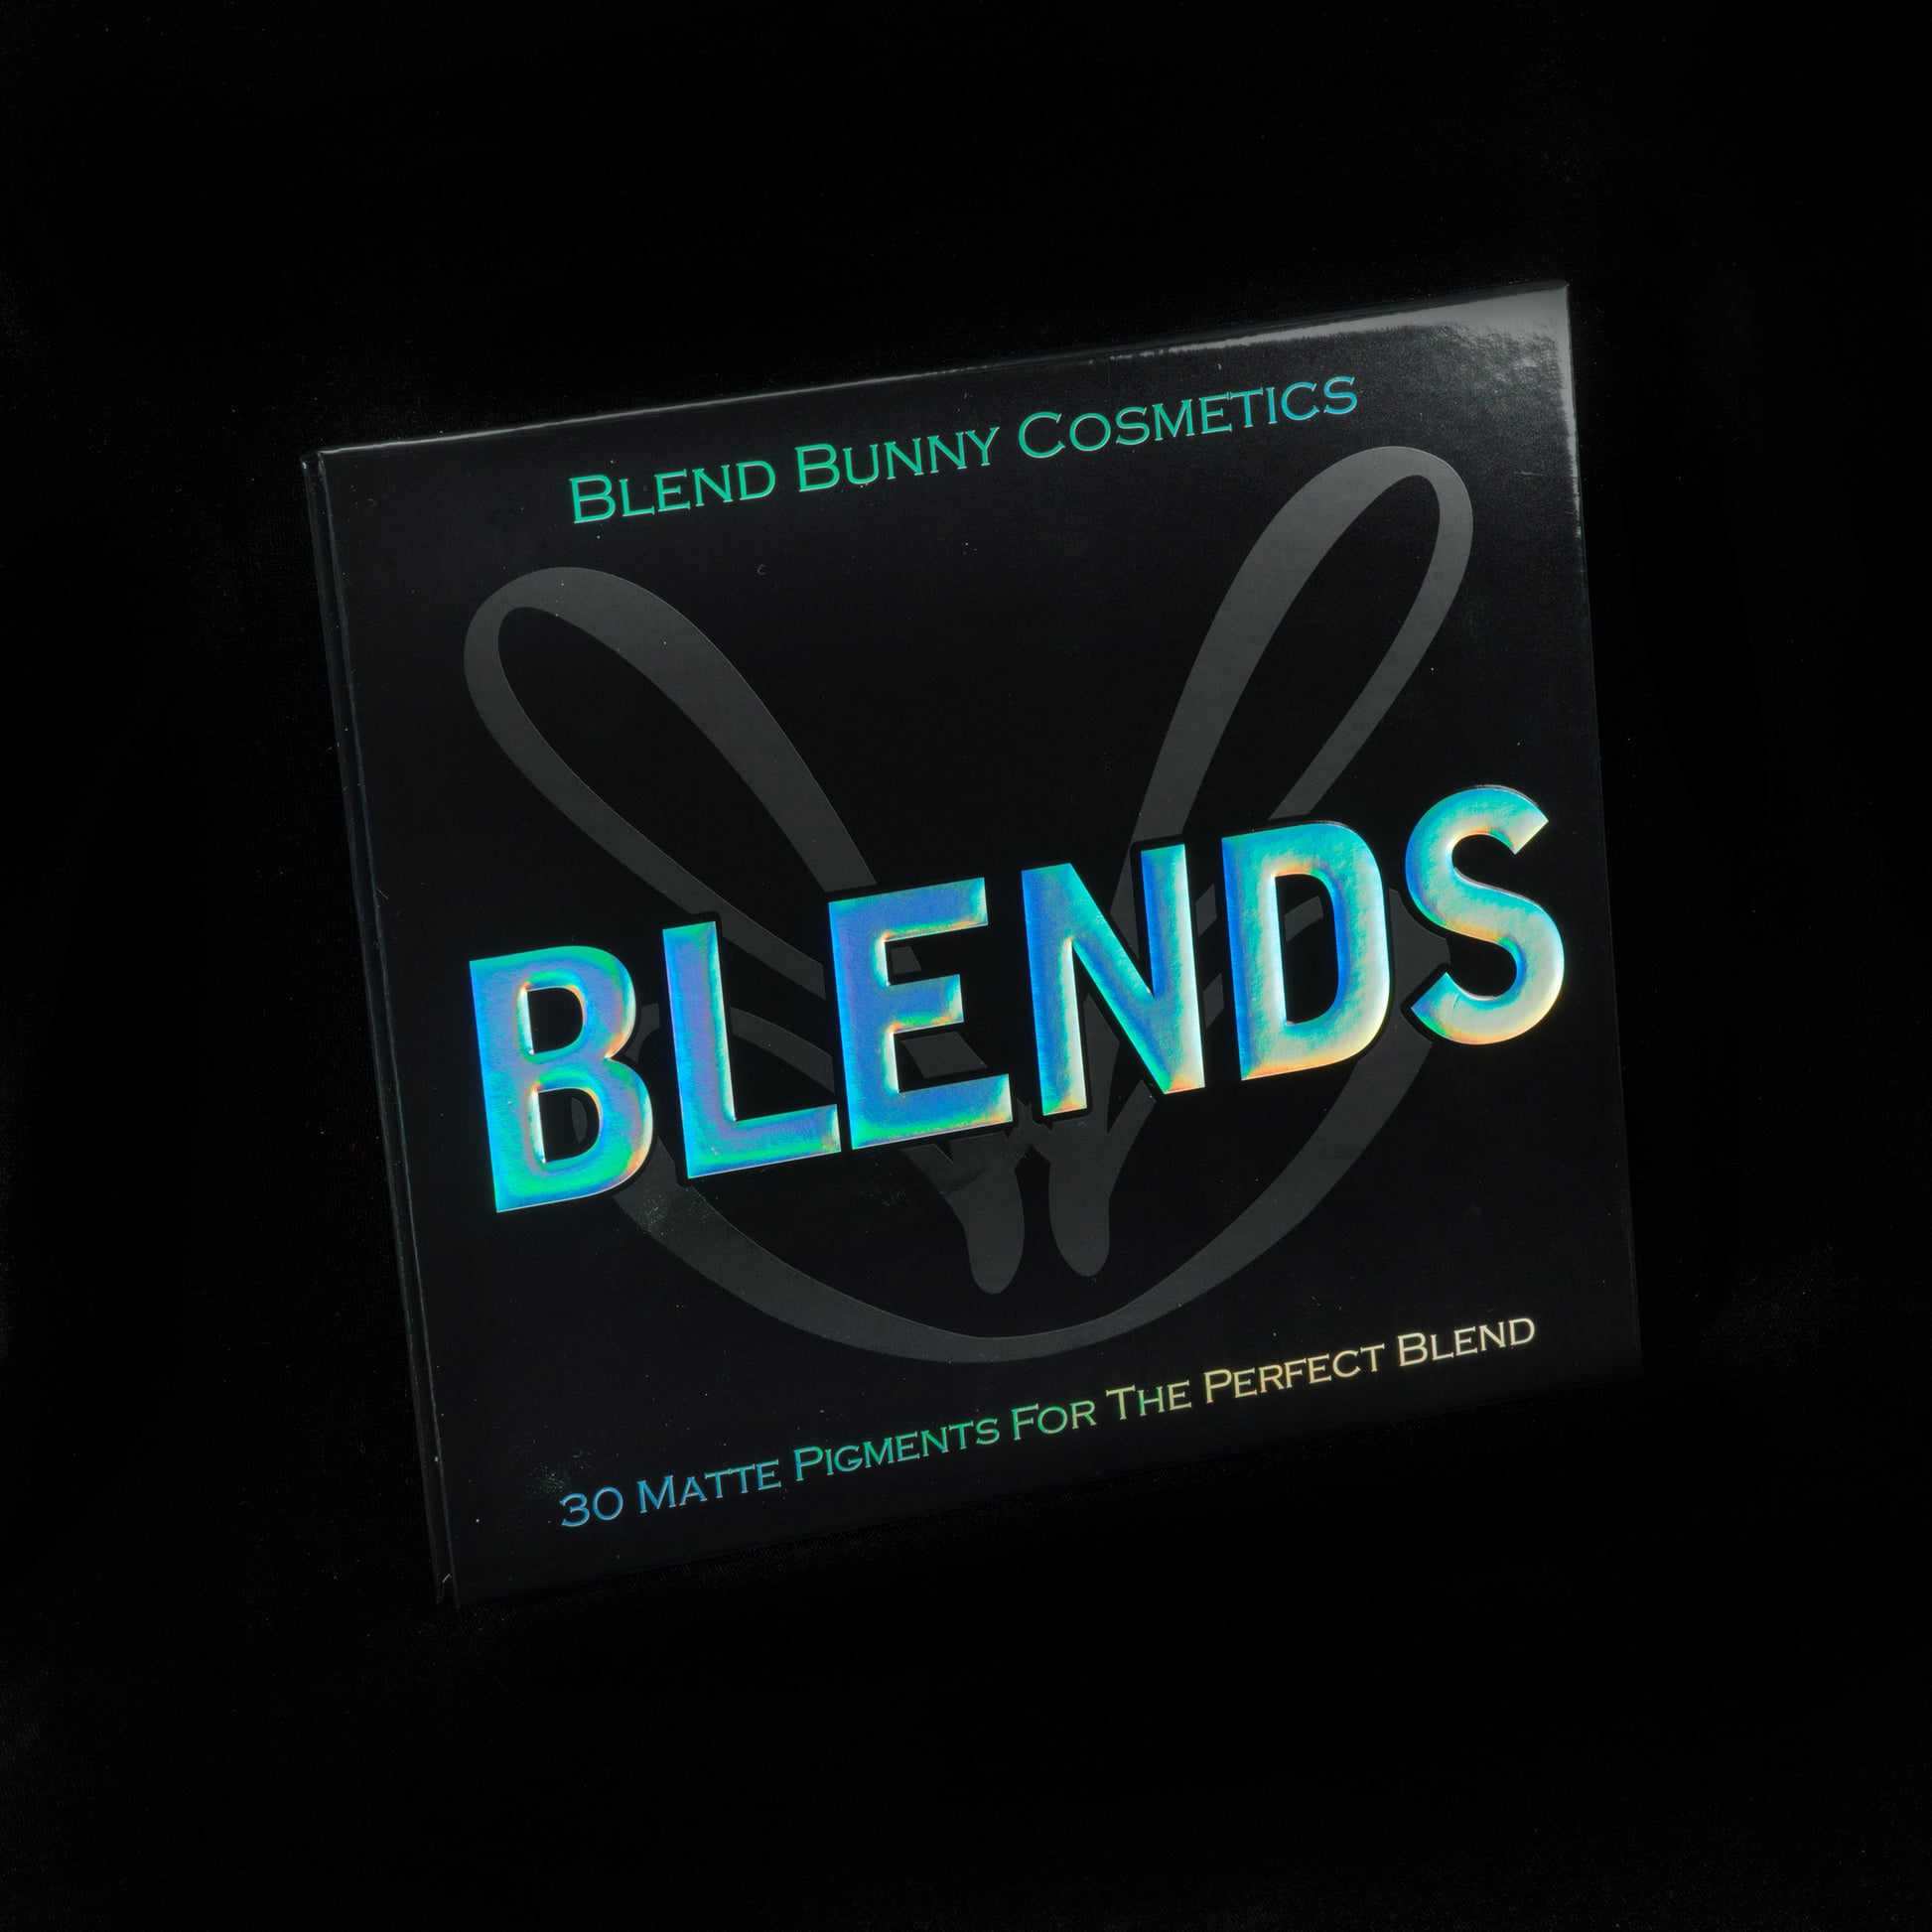 Blends palette closed by Blend Bunny Cosmetics